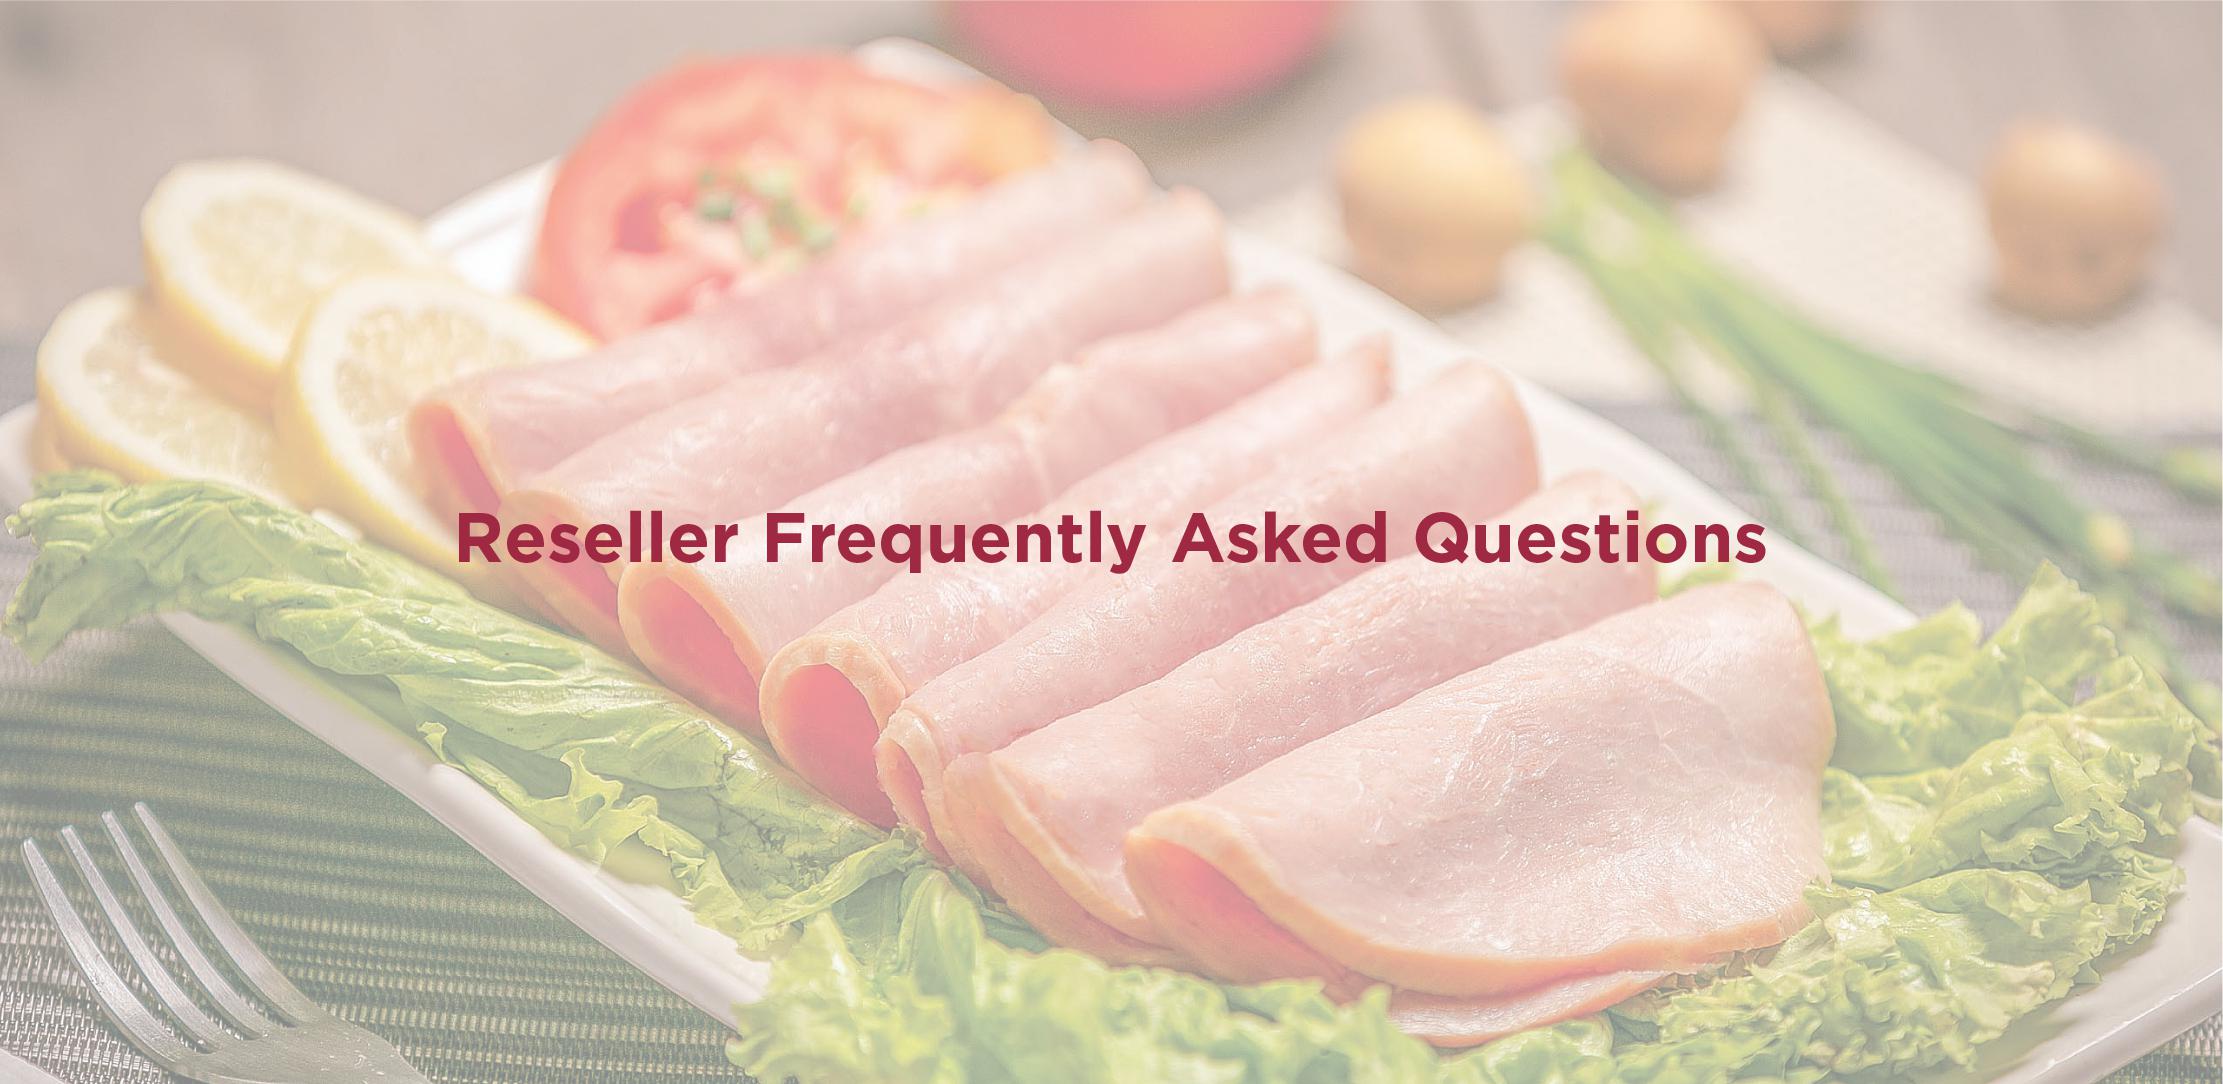 Reseller Frequently Asked Questions